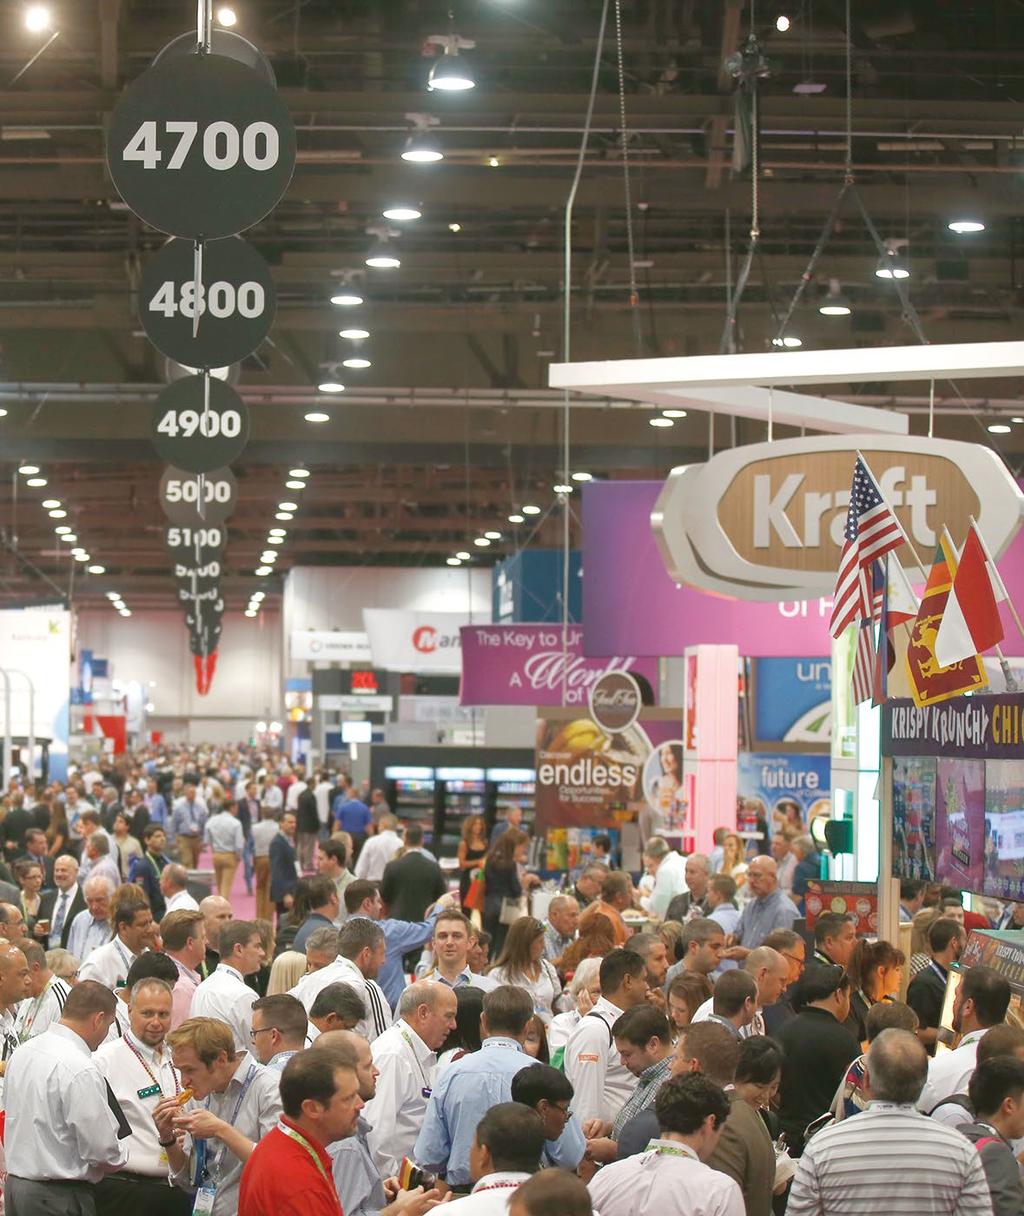 NACS SHOW BENEFITS The NACS Show is one of the largest buying shows in the U.S. It provides the most comprehensive representation of products, services and technologies for the convenience and fuel retailing industry.